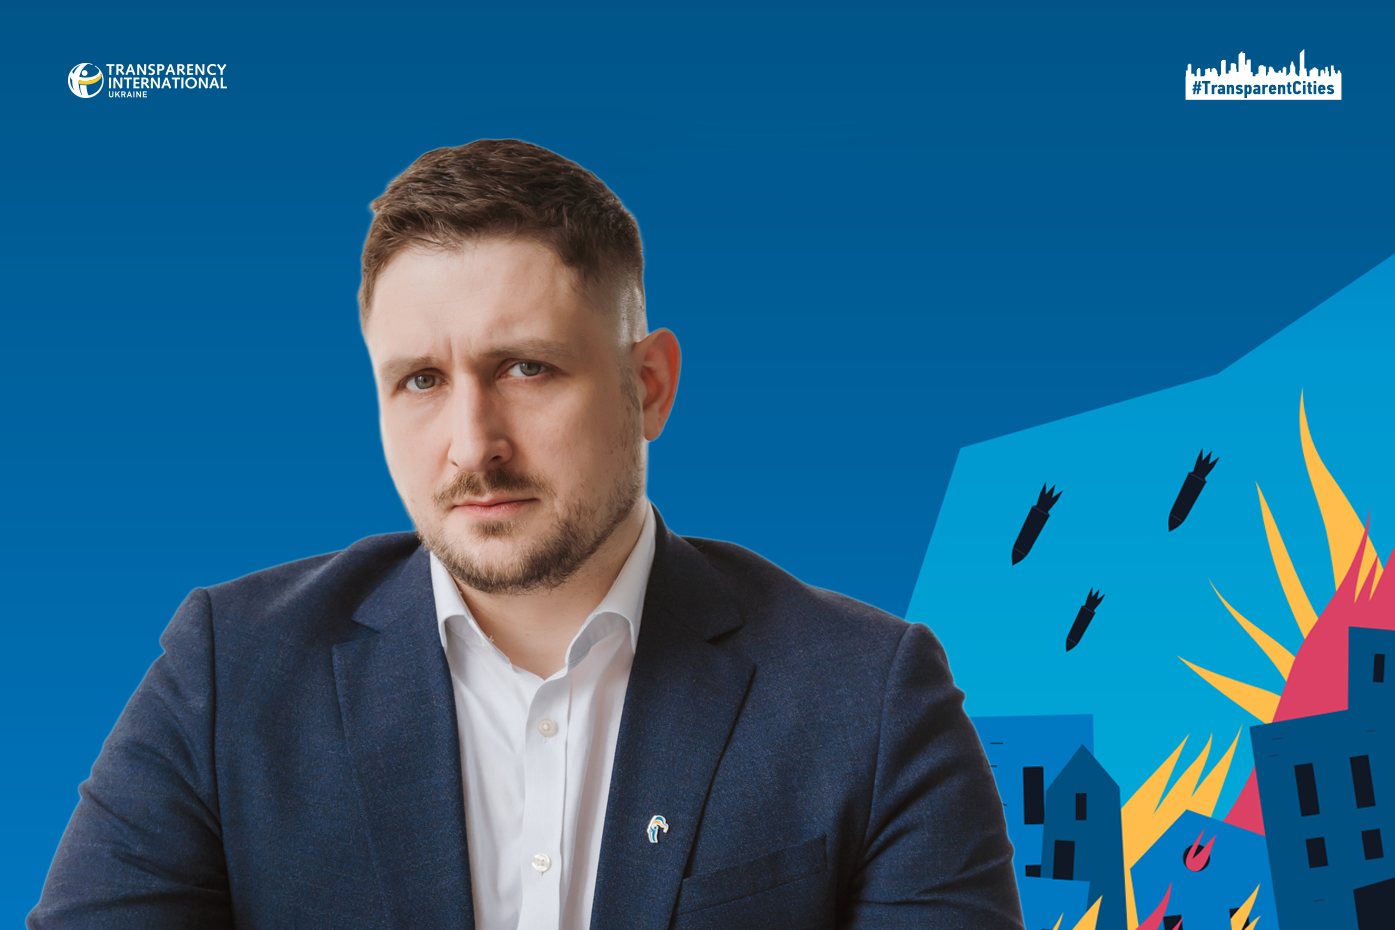 Andrii Borovyk: Why Ukrainian cities need to strengthen transparency during the war